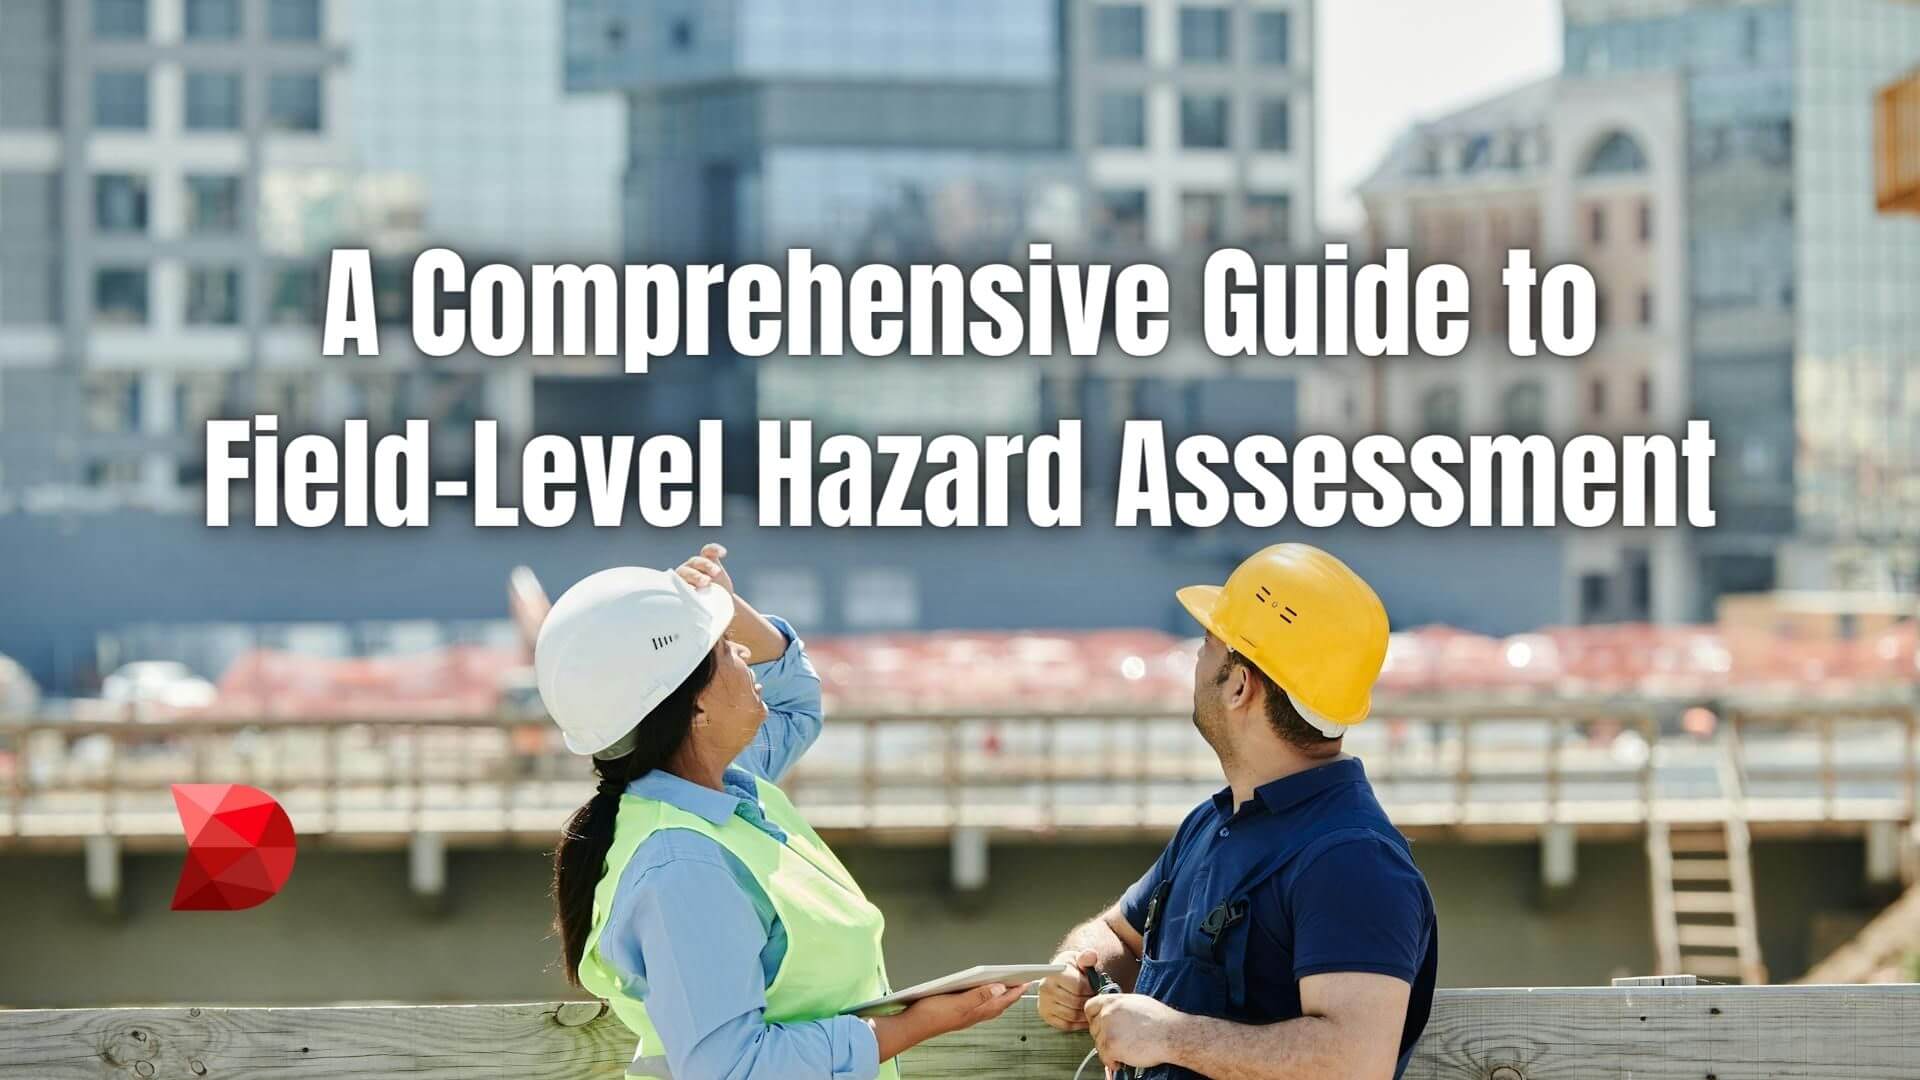 Empower your team with our guide to Field-Level Hazard Assessment. Stay ahead of safety regulations and protect your workforce.